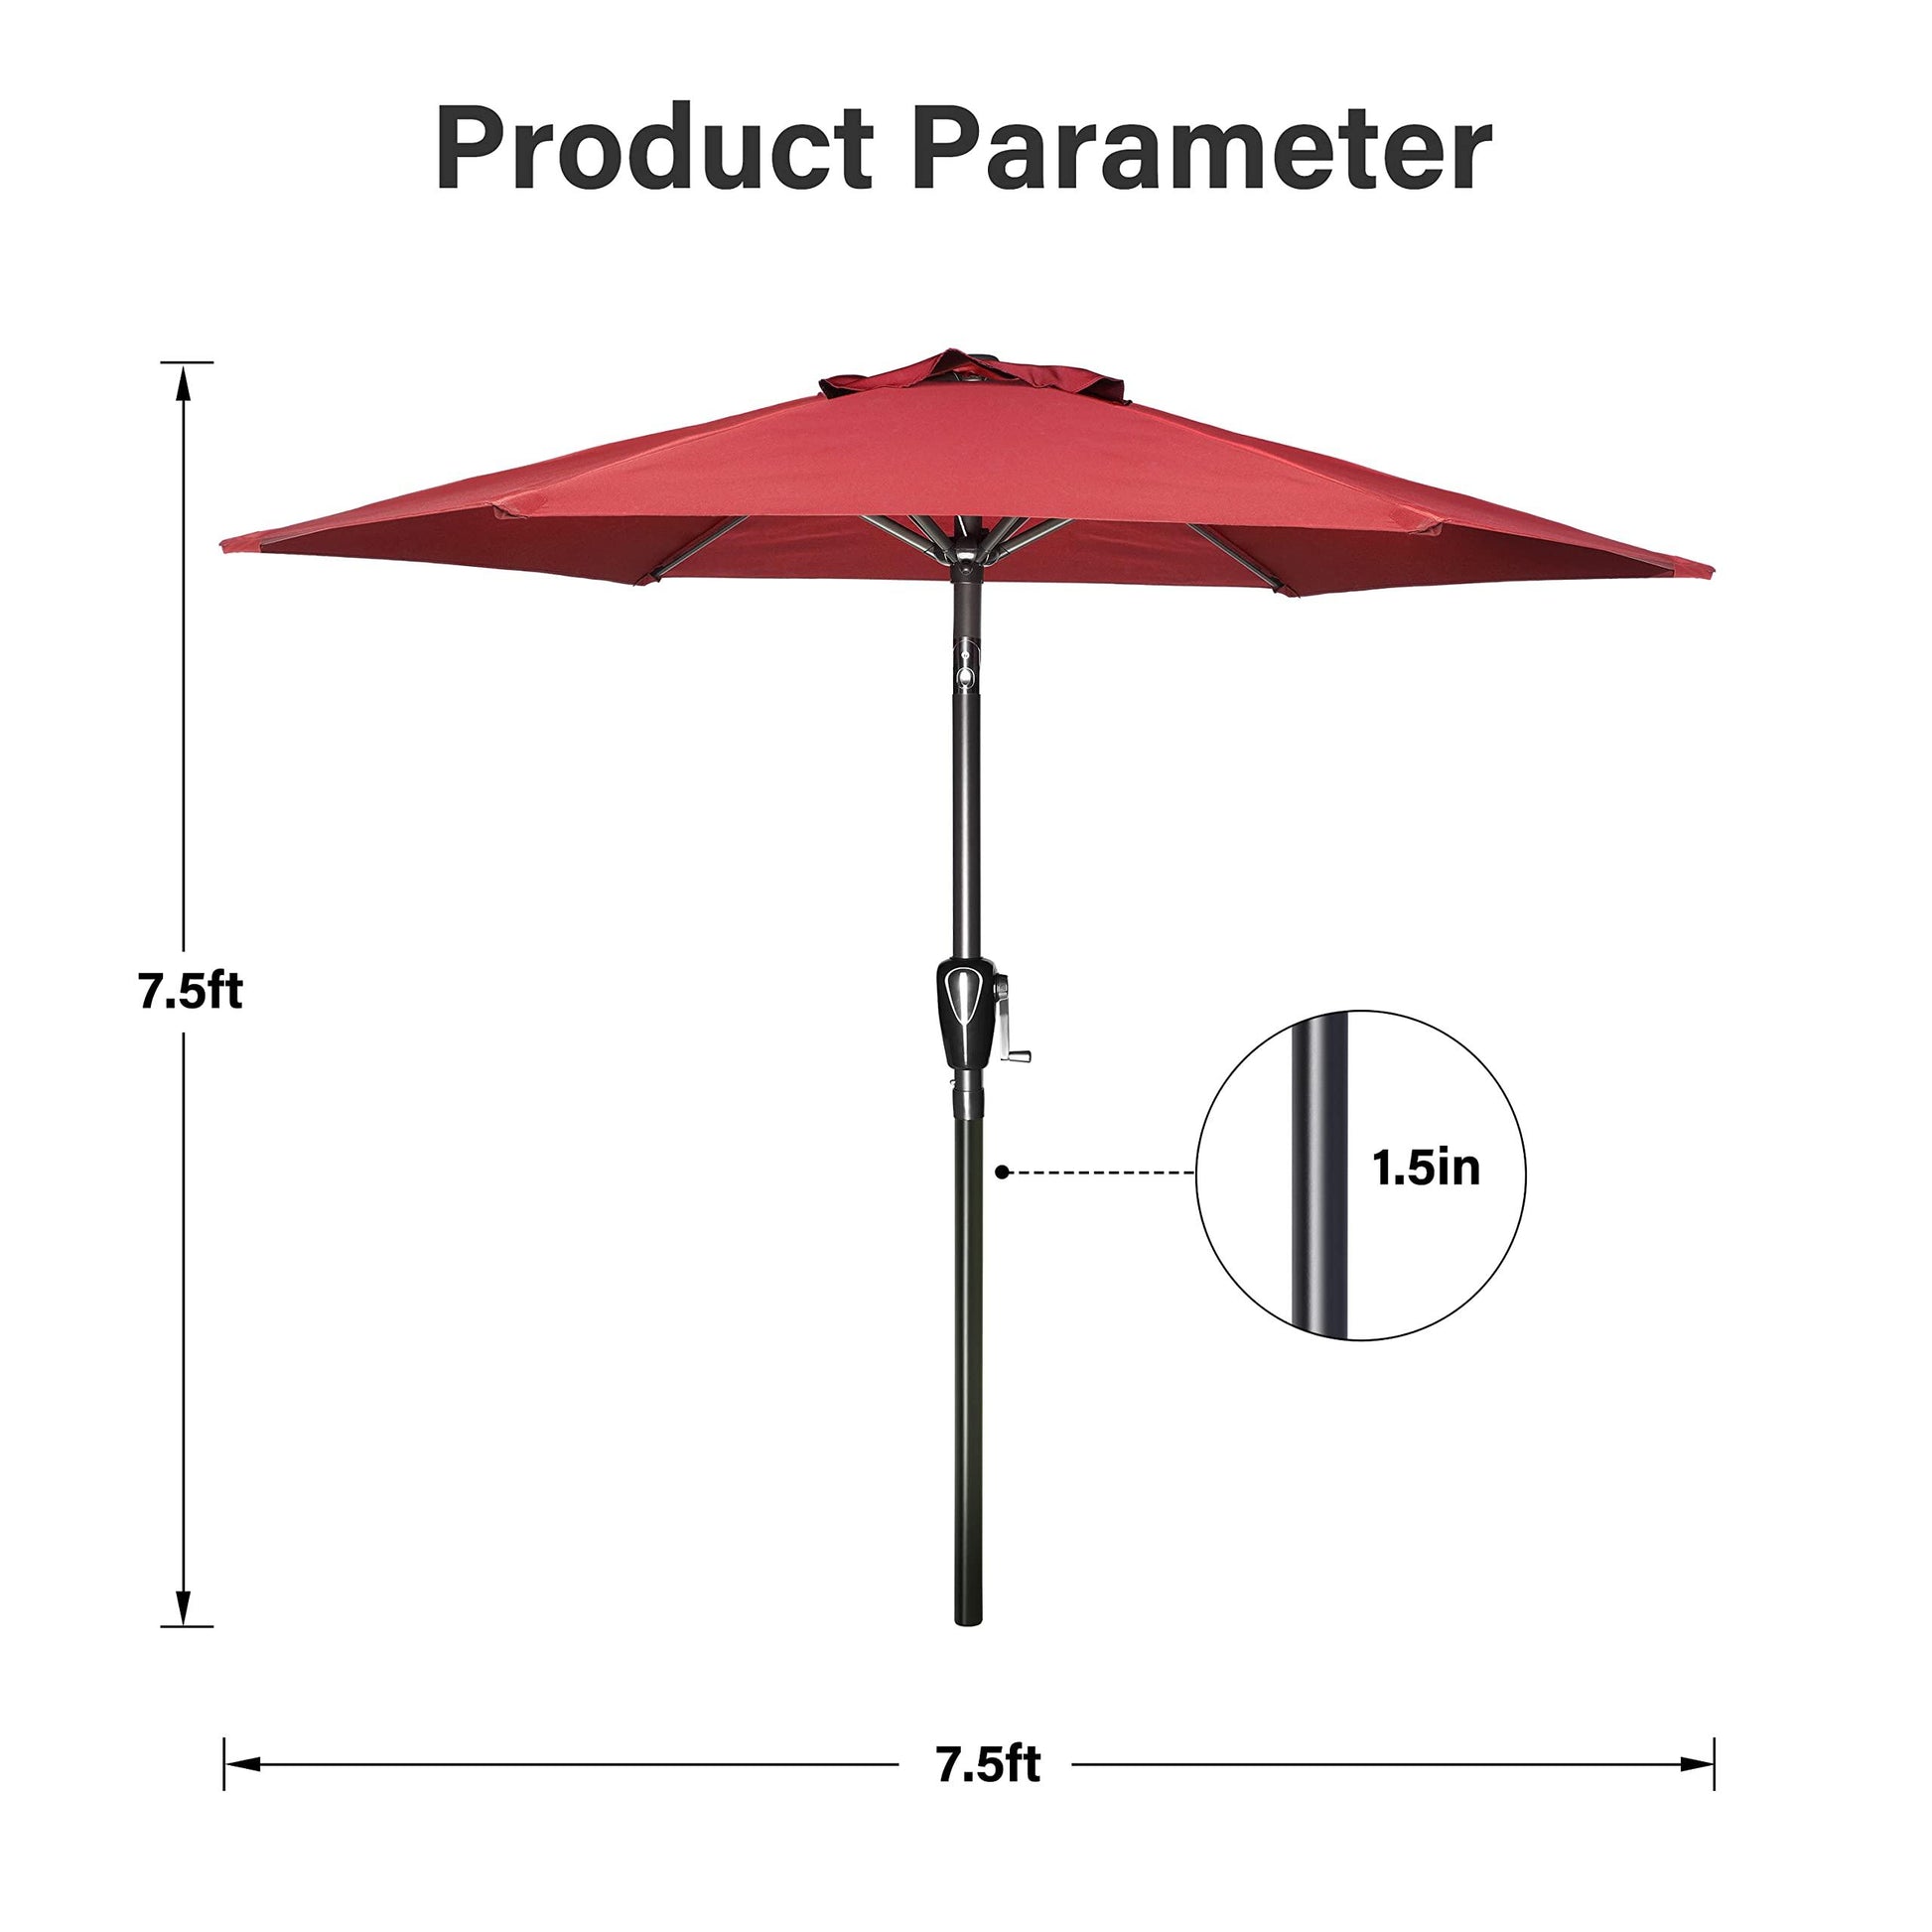 Simple Deluxe 9' Patio Umbrella Outdoor Table Market Yard Umbrella with Push Button Tilt/Crank, 8 Sturdy Ribs for Garden, Deck, Backyard, Pool, Red - CookCave